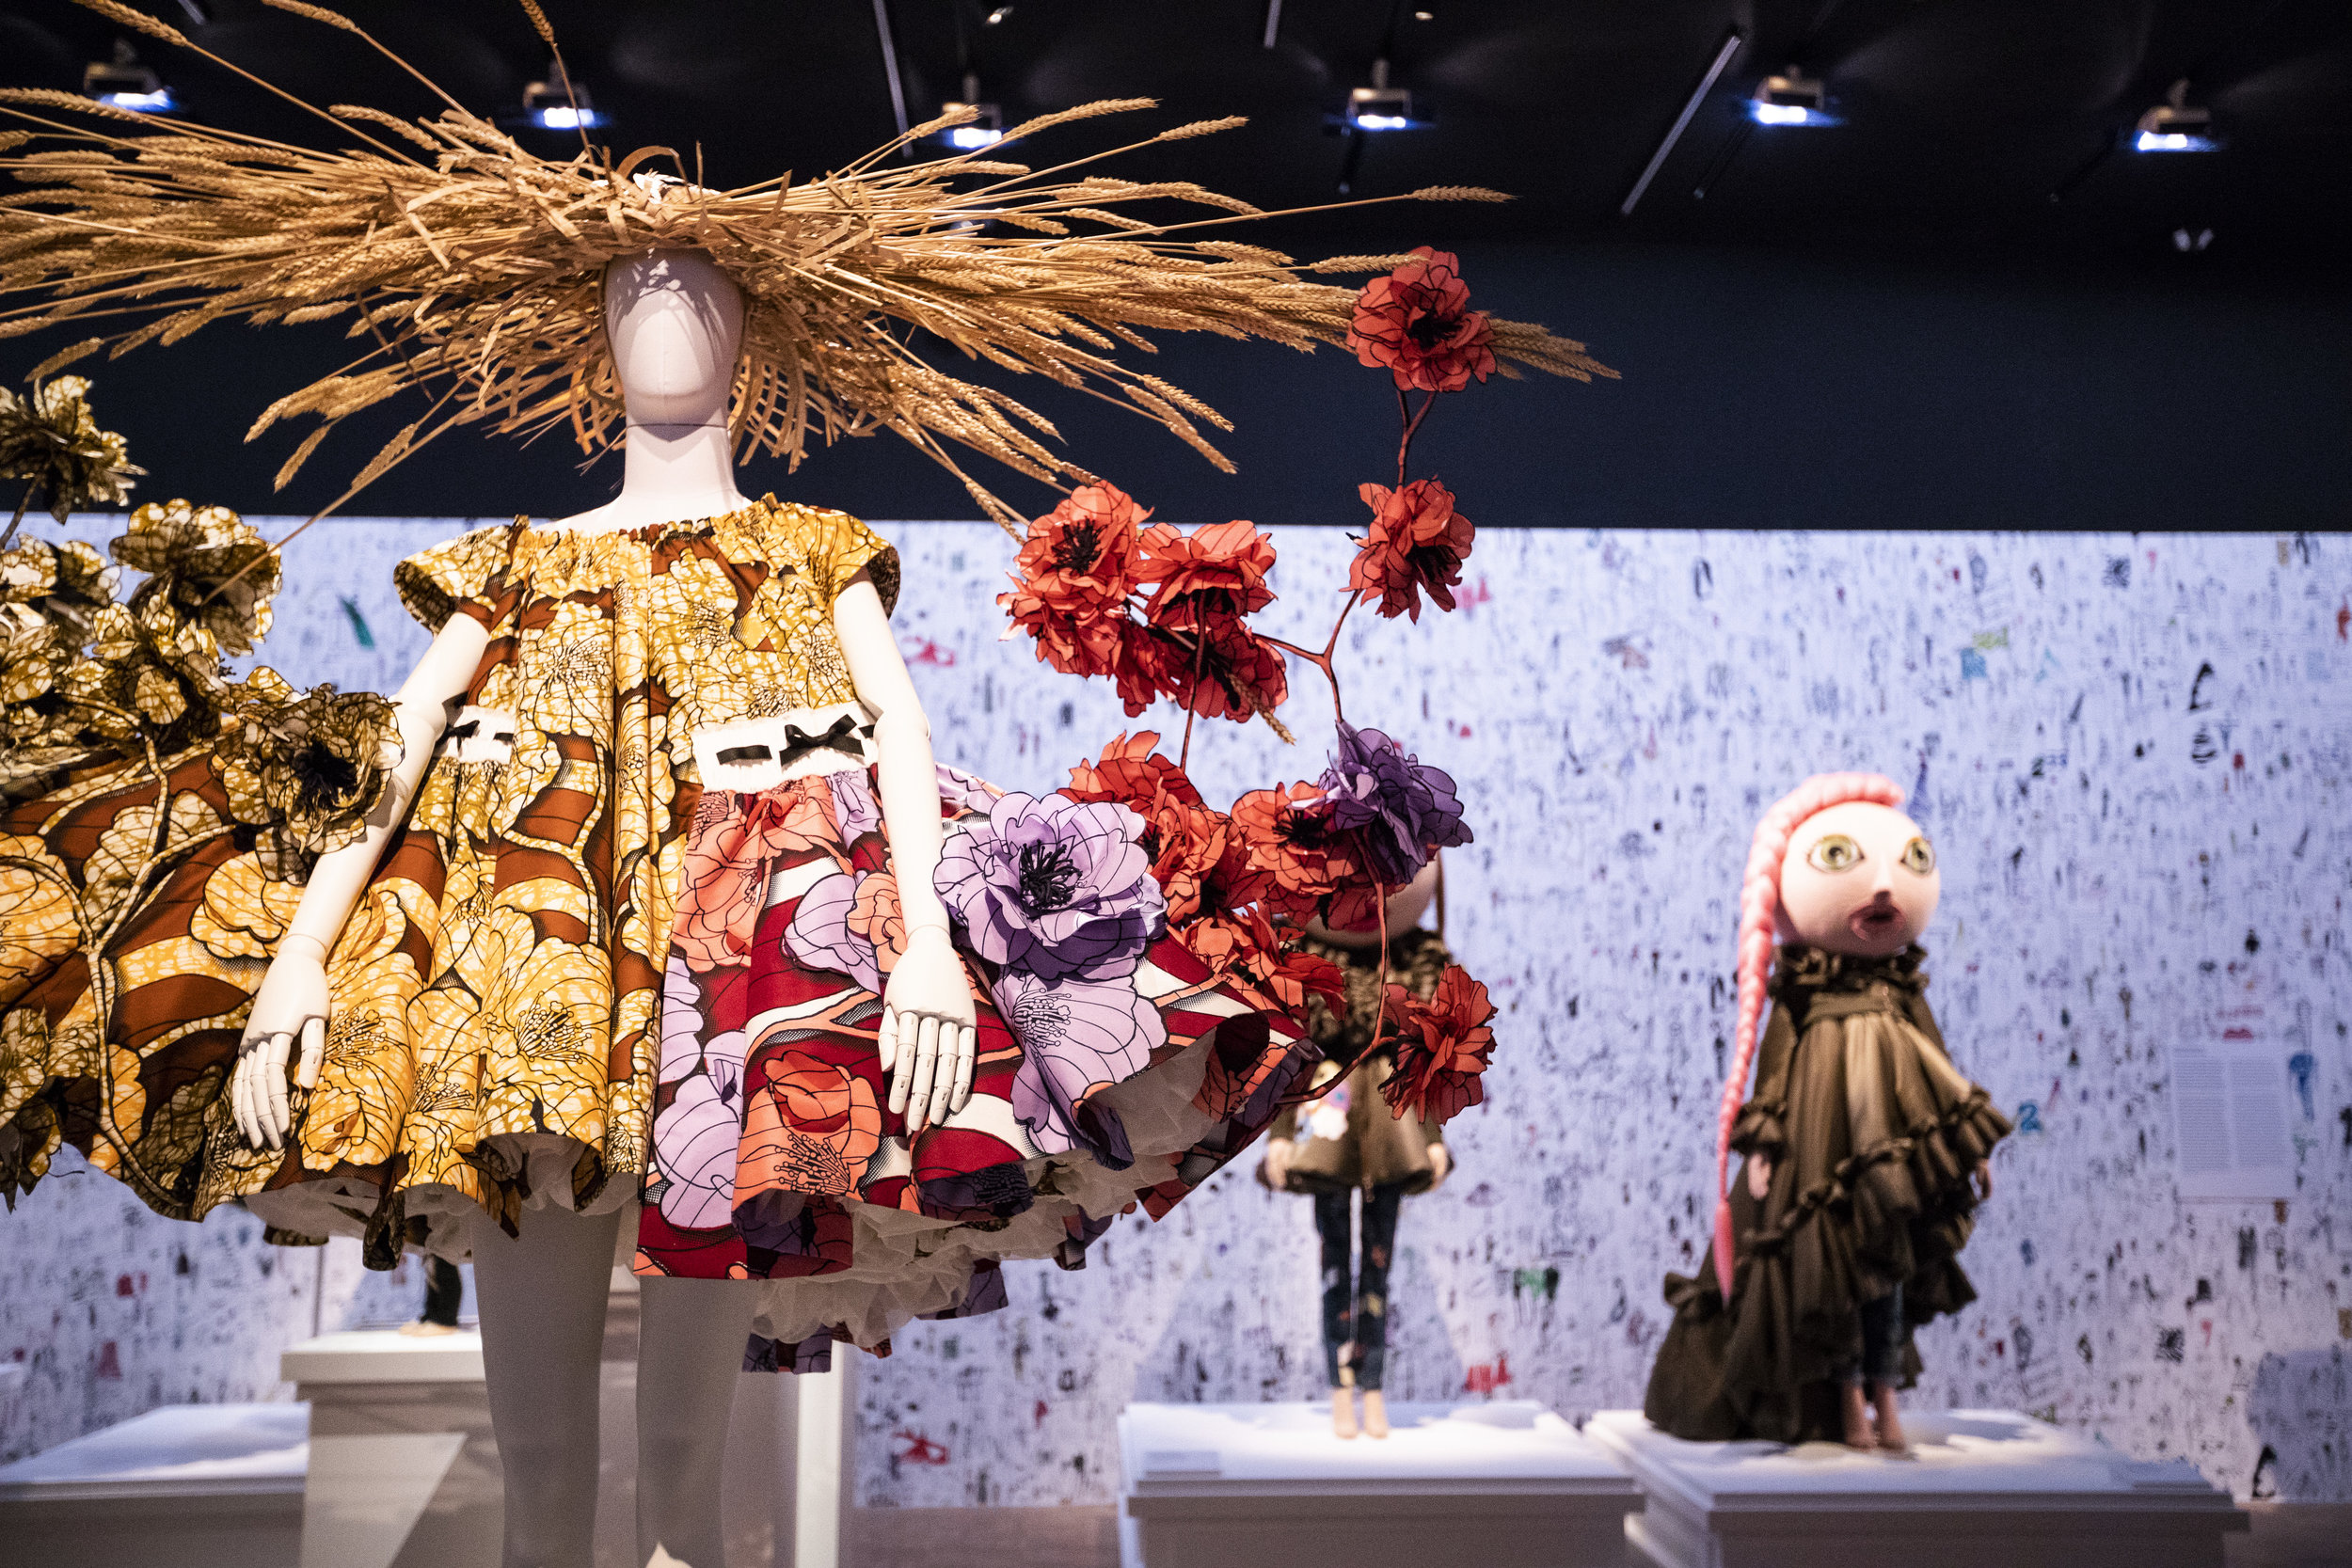  Viktor &amp; Rolf, Van Gogh Girls, haute couture collection SS 2015, Installation view of  Viktor&amp;Rolf: Fashion Artists 25 Years  at Kunsthal Rotterdam, Photo: Peter Stigter     